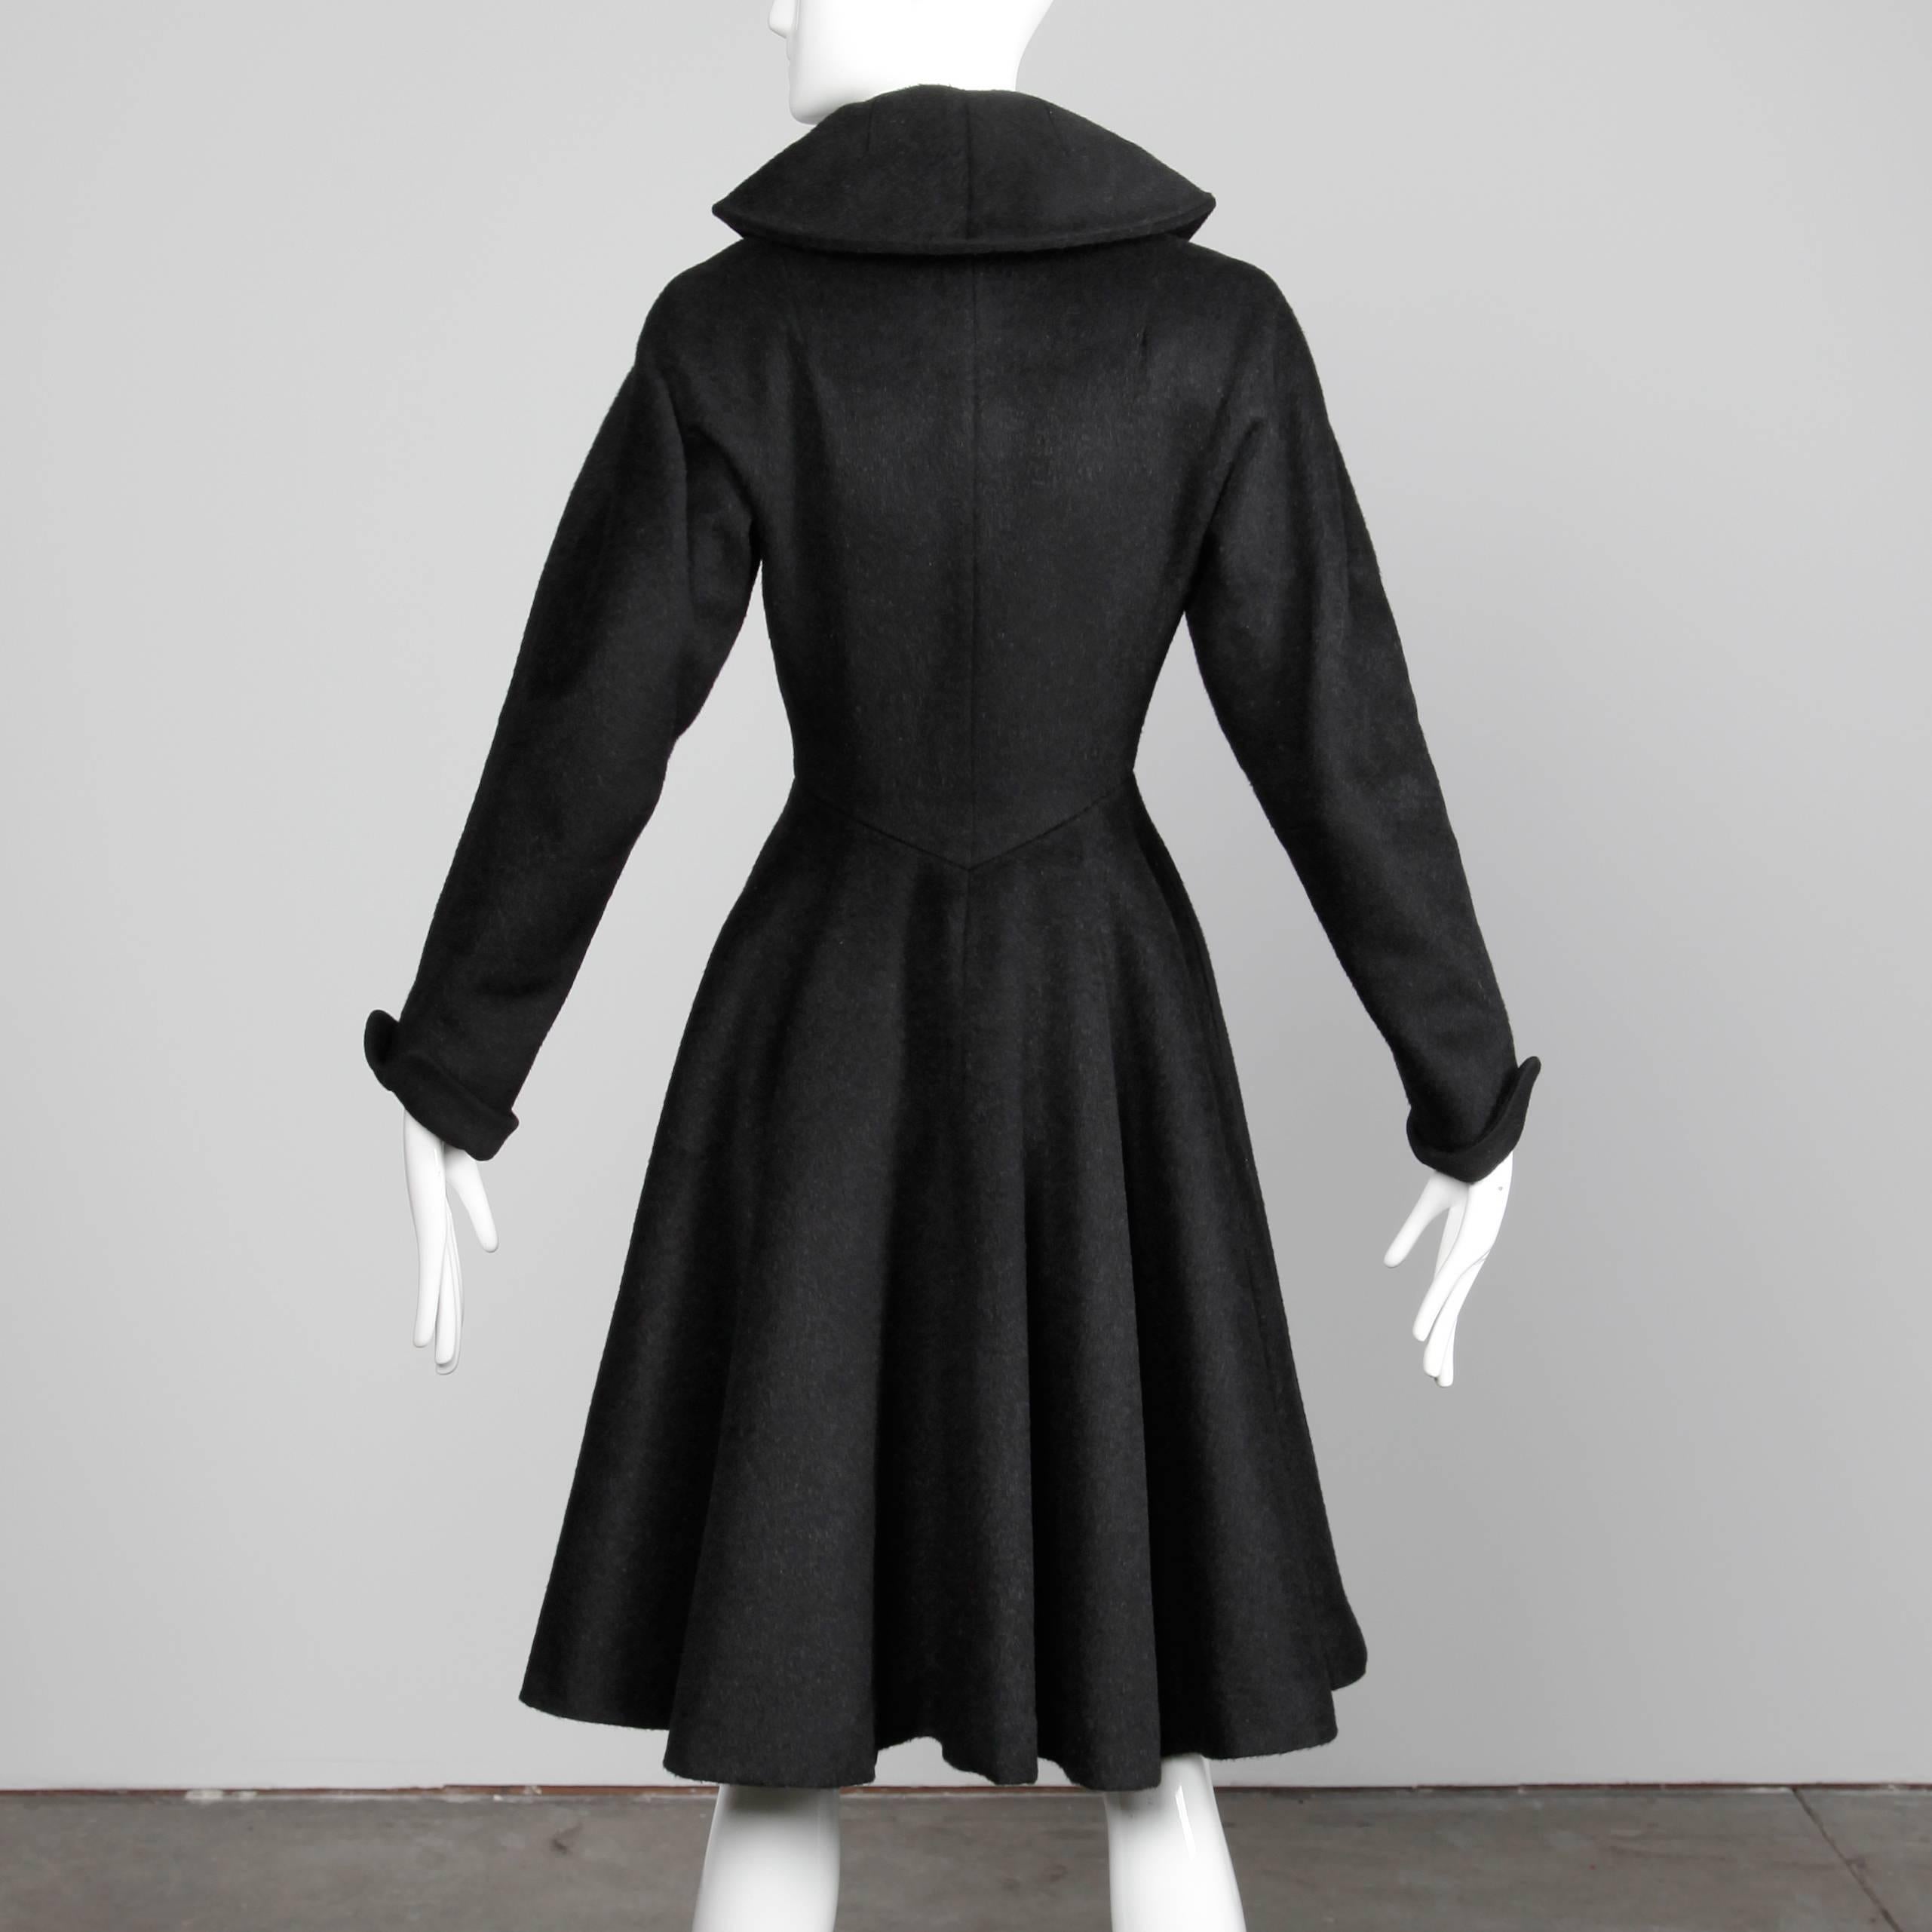 So much fabric in this heavy black wool coat from the 1950s! Full sweep and tiny nipped waist. Fully lined with front button closure. Hidden side pockets. 100% Wool. Fits like a modern size small. The bust measures 35